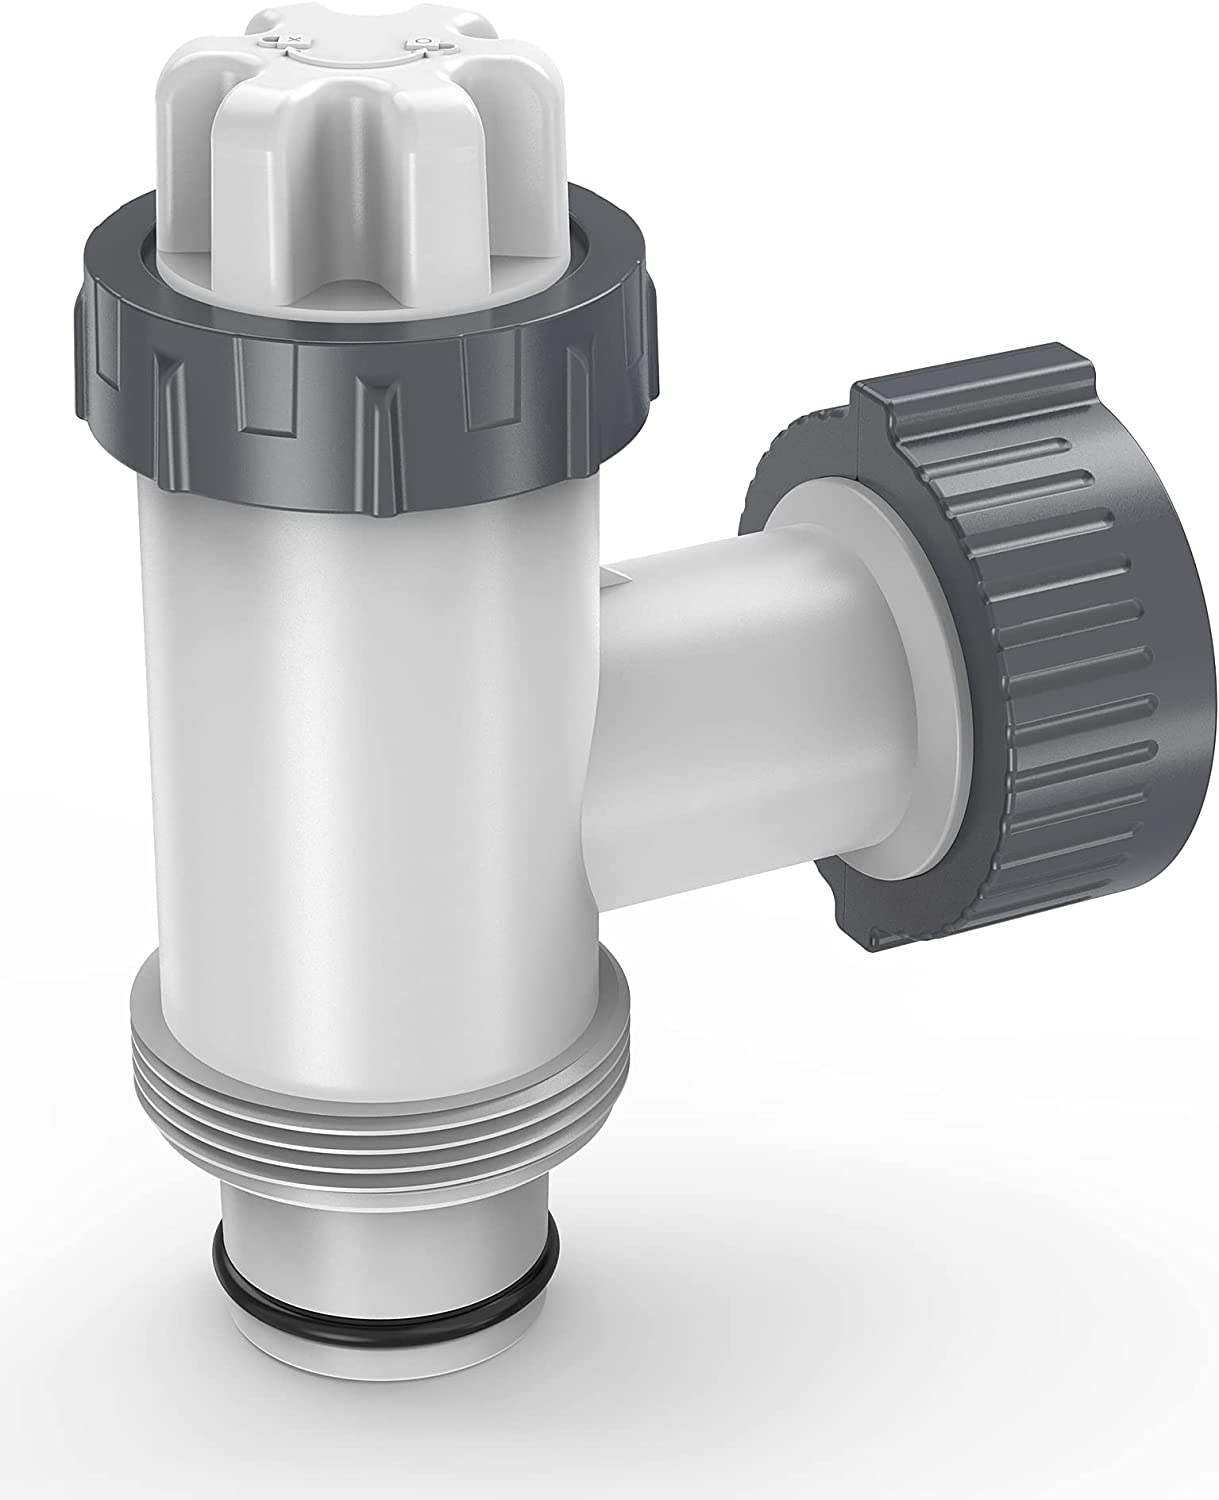 Plunger Valve for Intex Pool